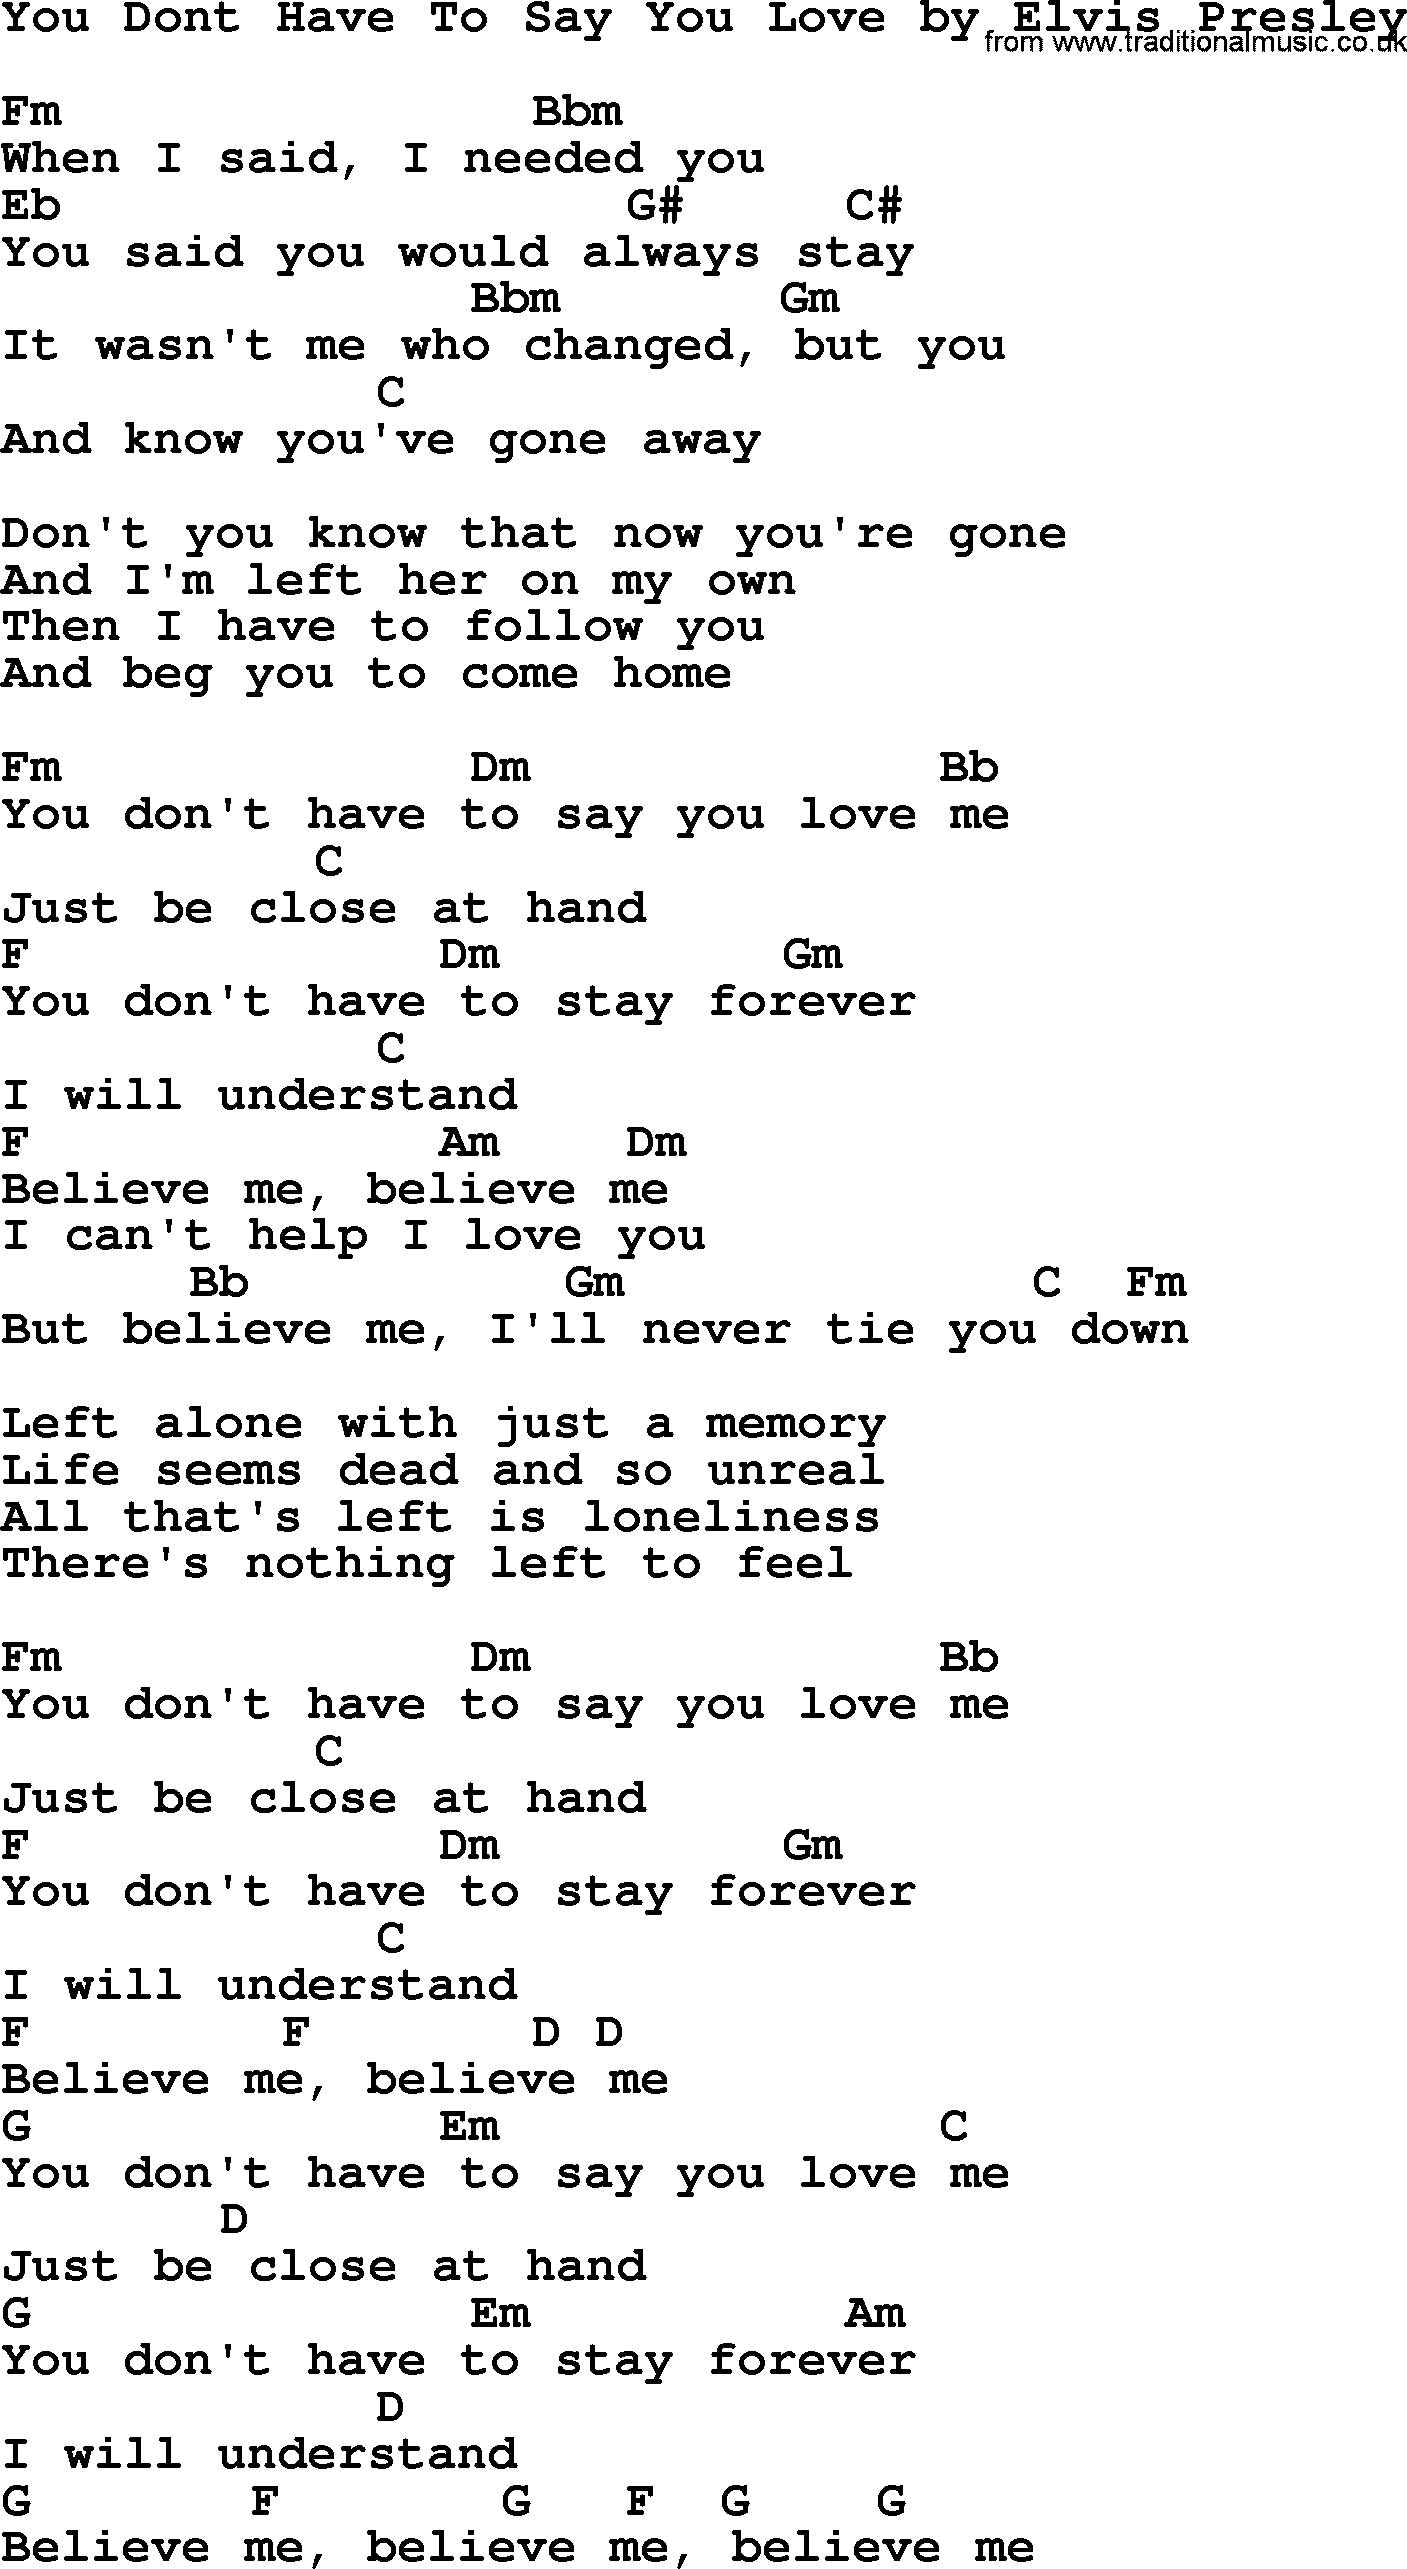 You Dont Have To Say You Love, by Elvis Presley - lyrics and chords Have To Say I Love You In A Song Chords